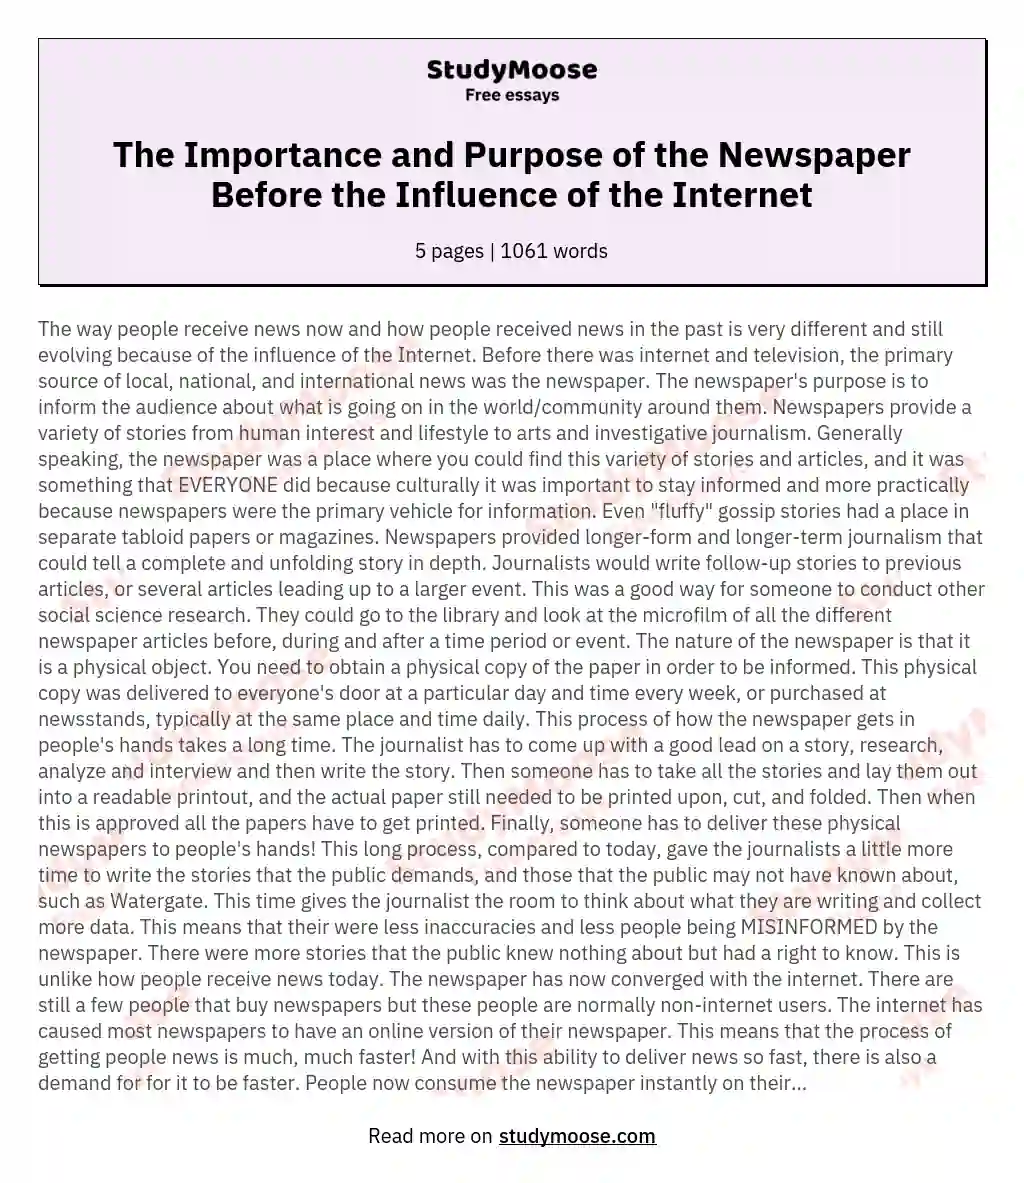 The Importance and Purpose of the Newspaper Before the Influence of the Internet essay